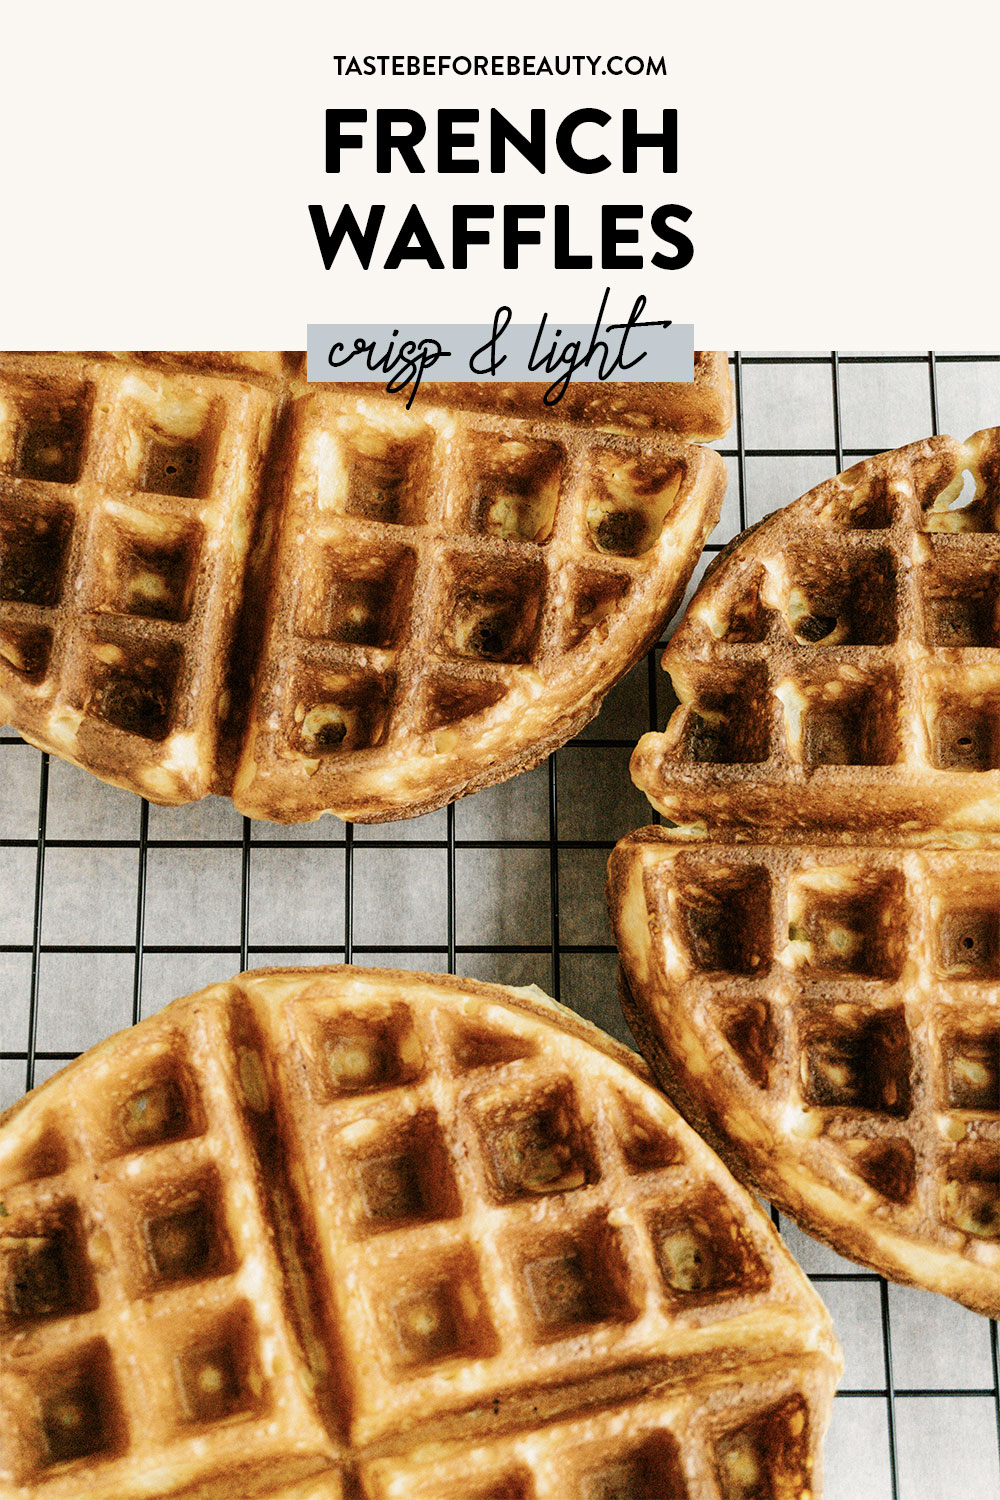 taste before beauty french waffles on cooling wire rack pinterest pin